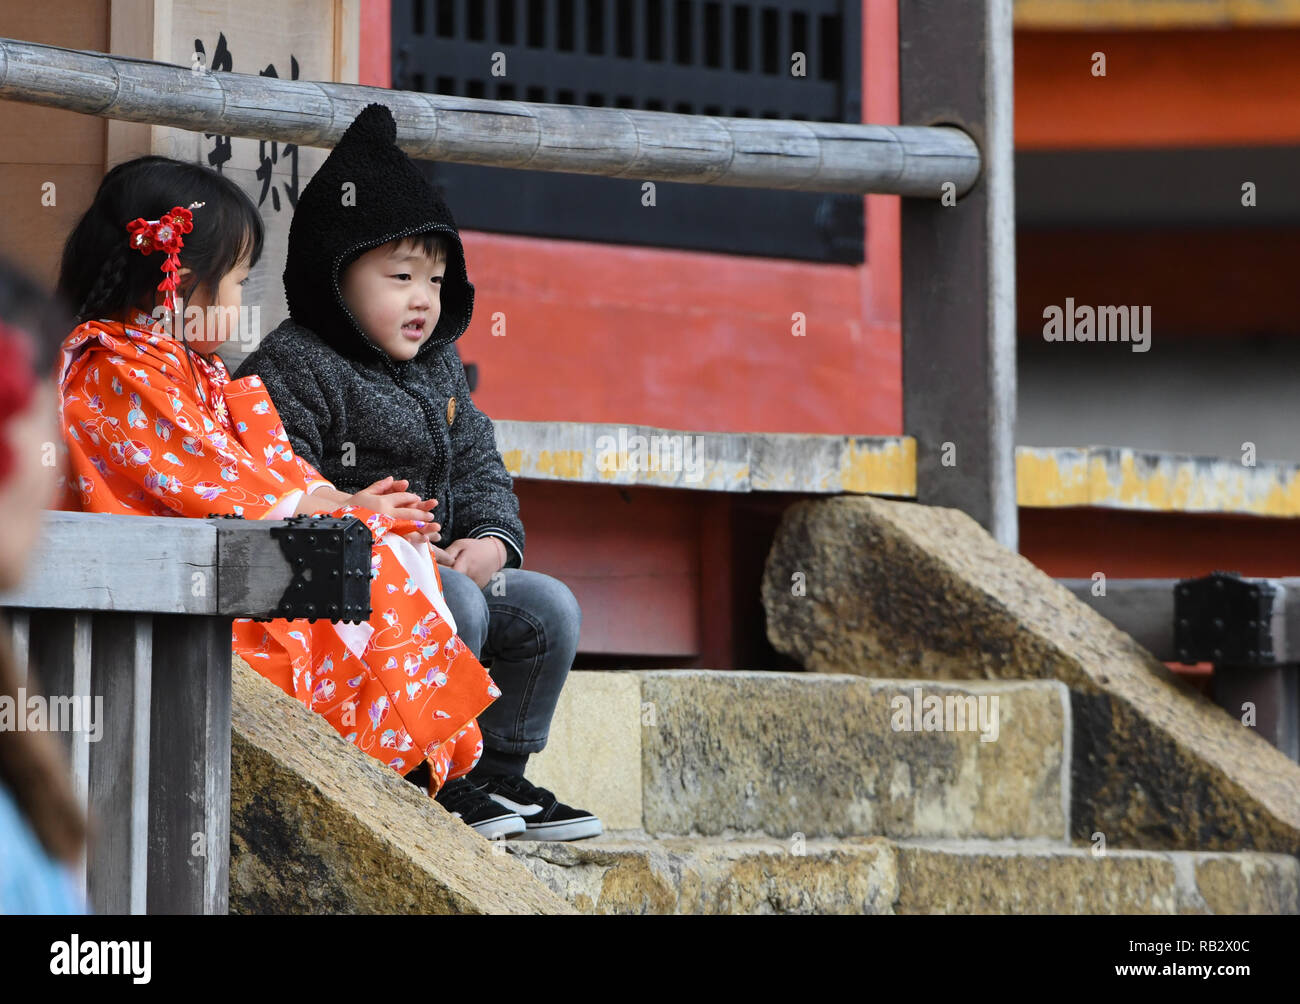 January 2, 2019 - Osaka, Japan - Riko Kasam of Osaka Japan sits on the stairs of one of the structures at the Iconic Buddhist temple Kiyomizu-dera on Mount Otowa known for the scenic views. On January 2, 2019.  Photo by: Ramiro Agustin Vargas Tabares (Credit Image: © Ramiro Agustin Vargas Tabares/ZUMA Wire) Stock Photo